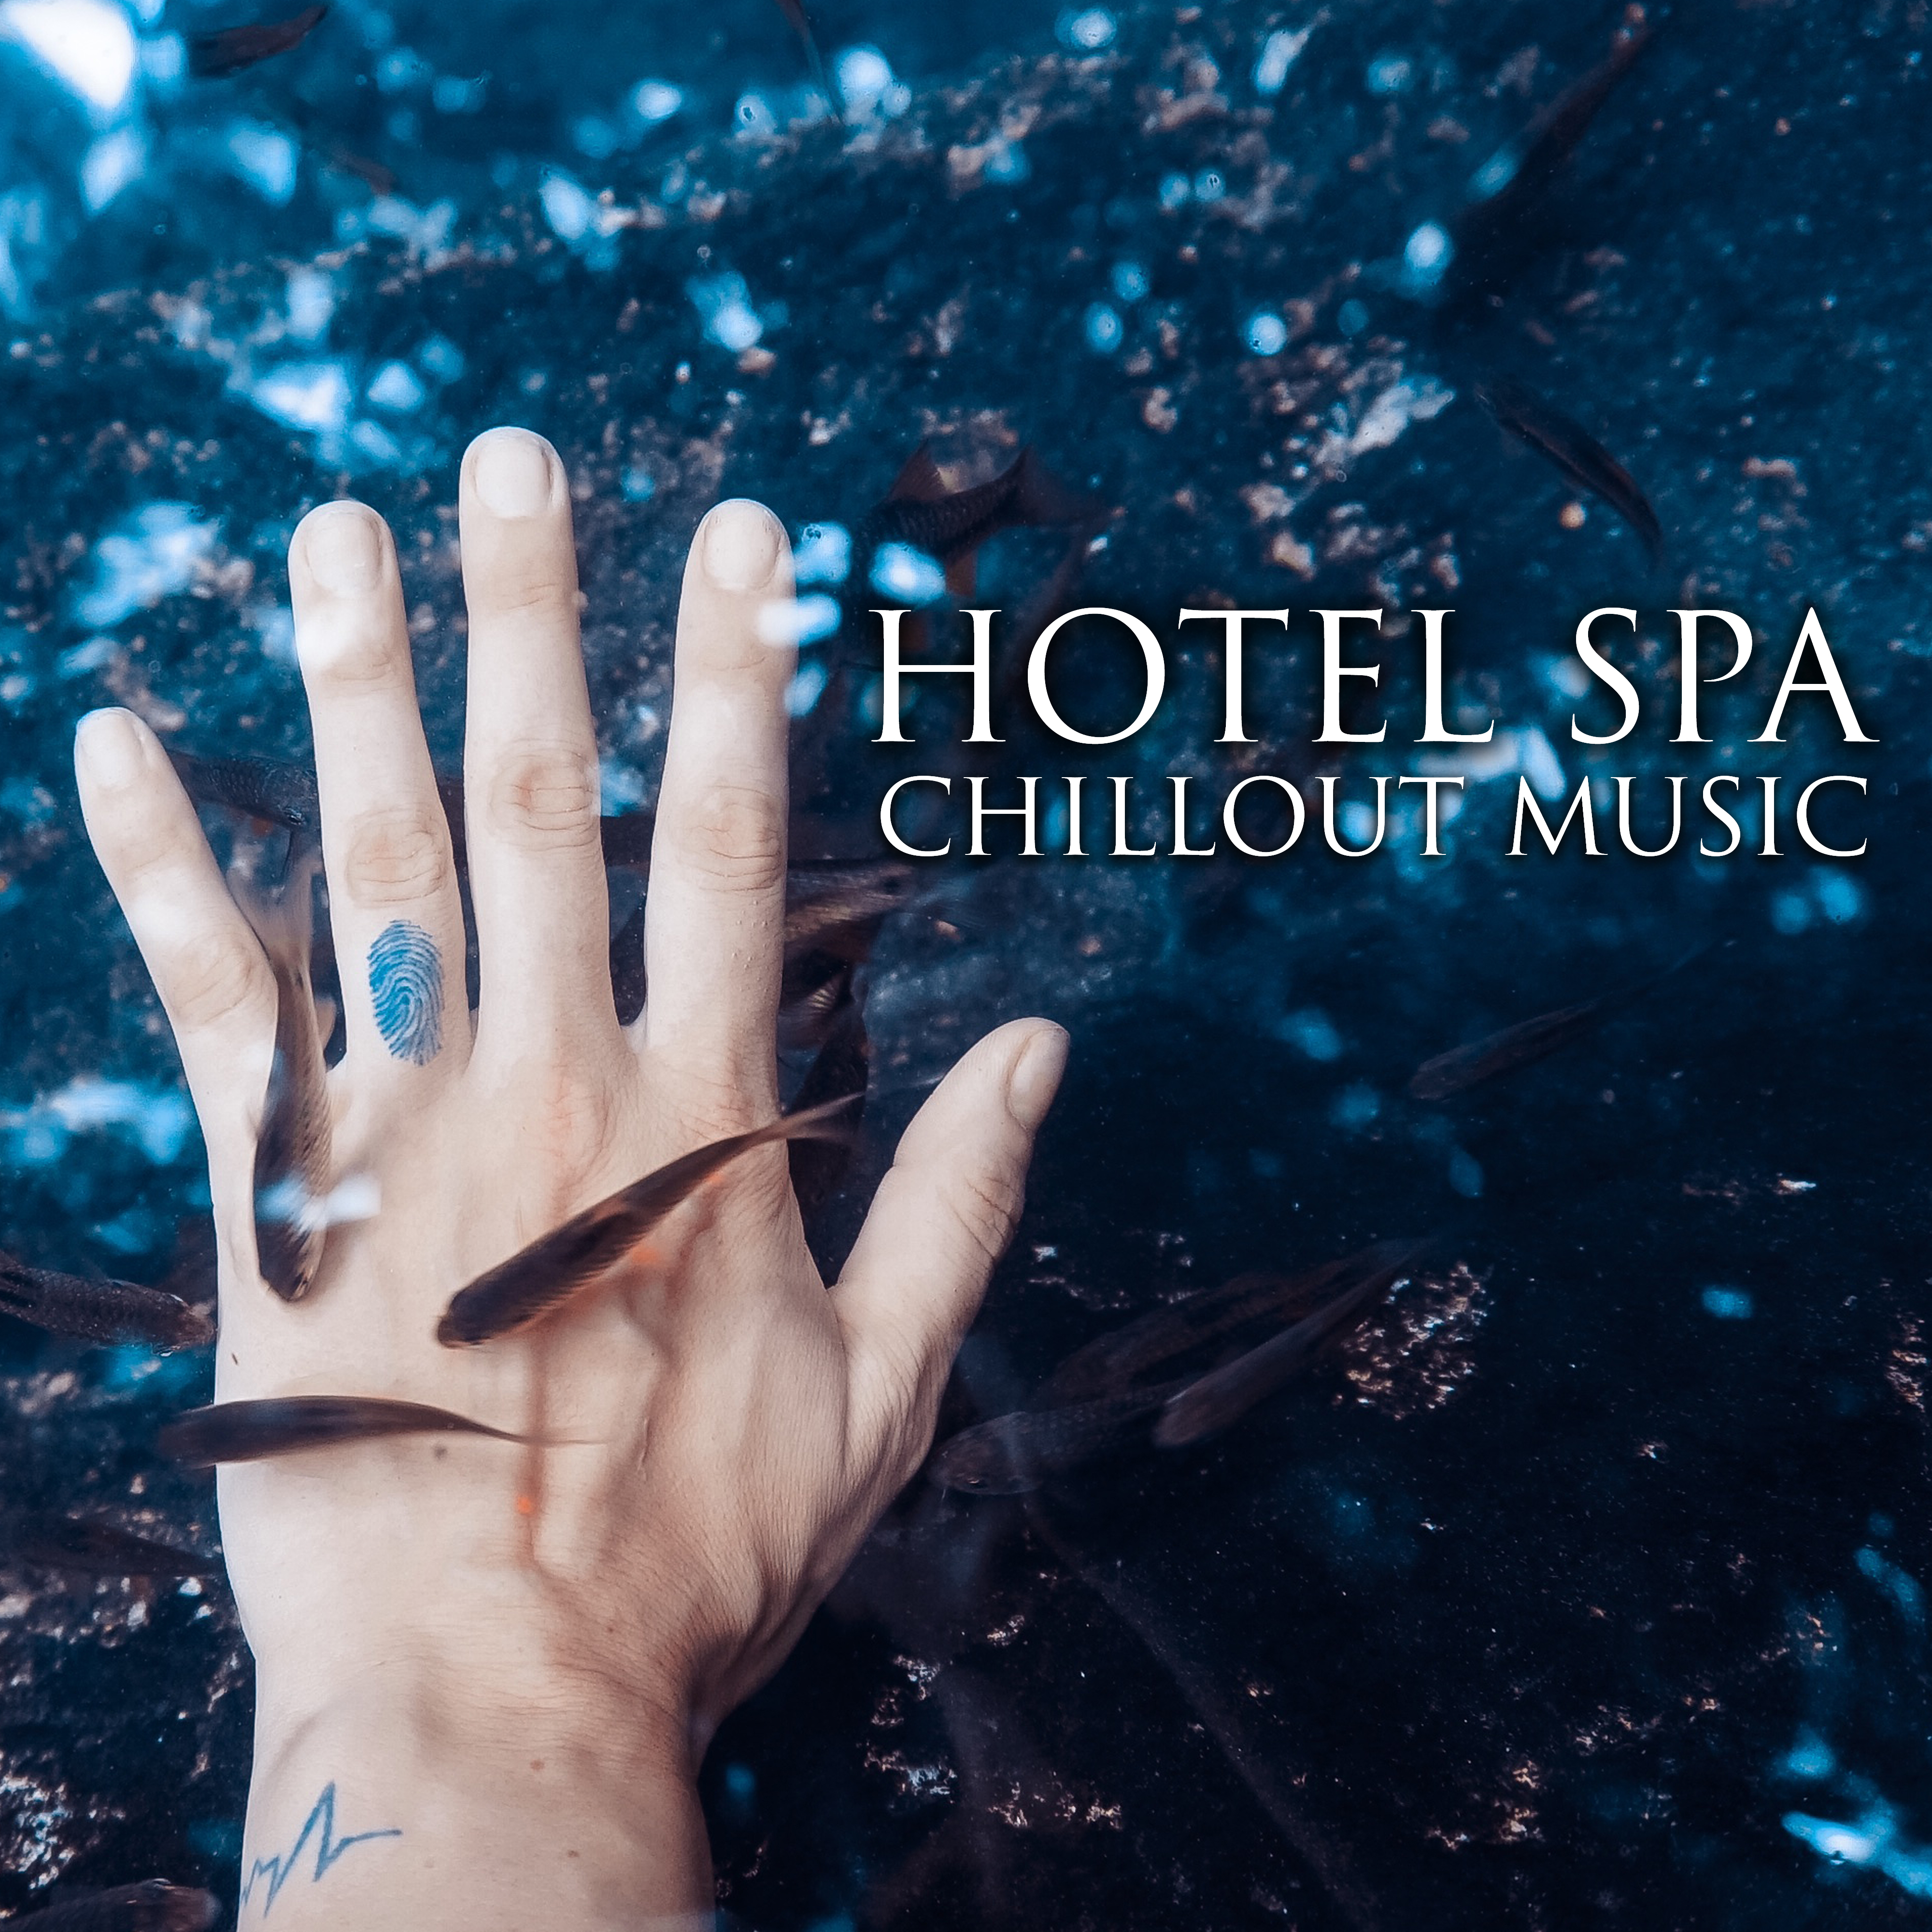 Hotel Spa Chillout Music – Essential Chillout for Spa, Wellness, Tropical Vibes, Chill Out Music